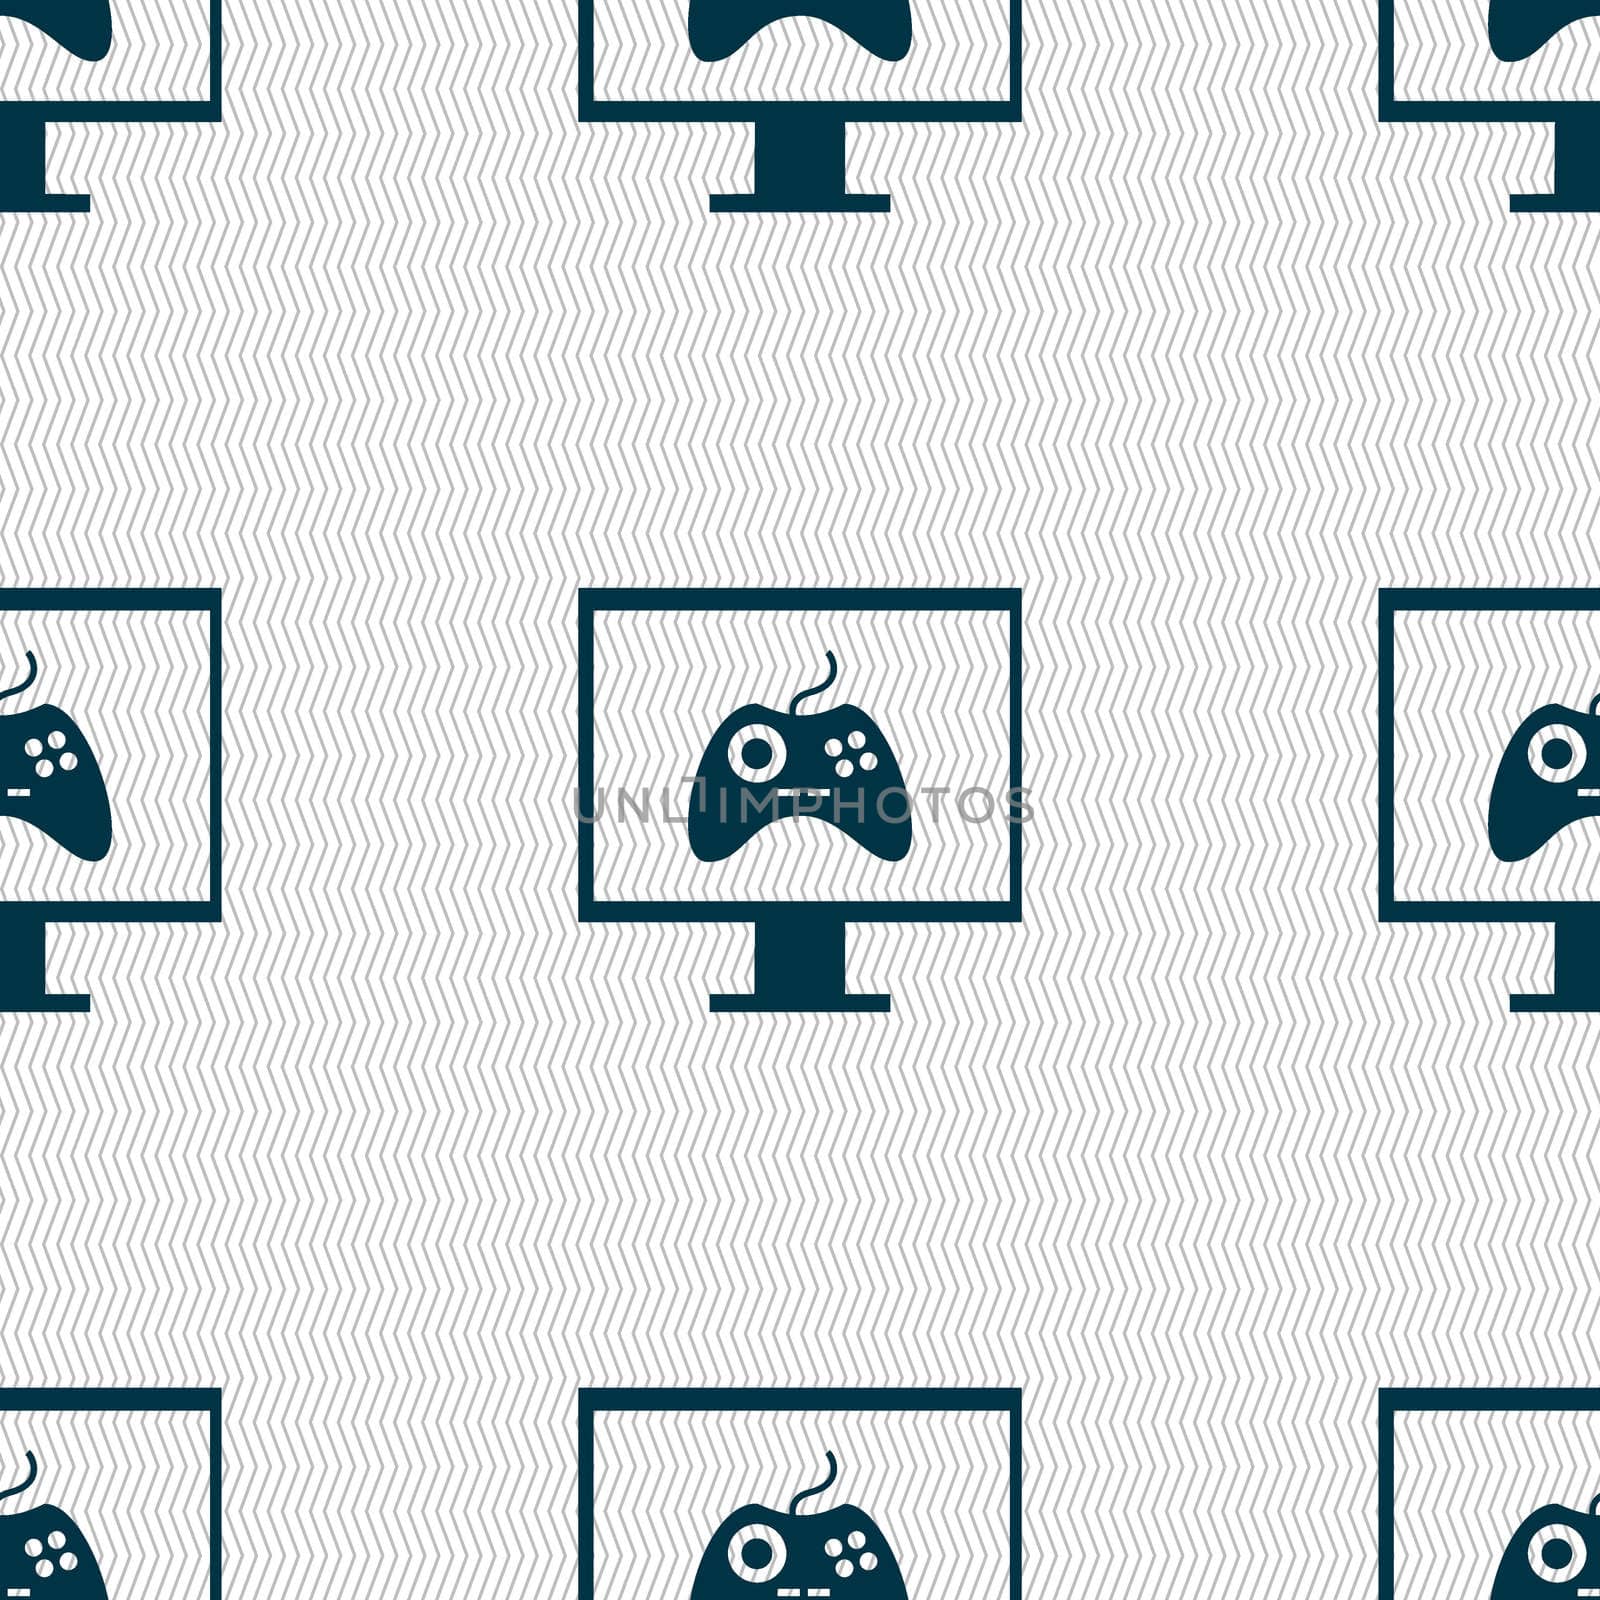 Joystick and monitor sign icon. Video game symbol. Seamless abstract background with geometric shapes. illustration